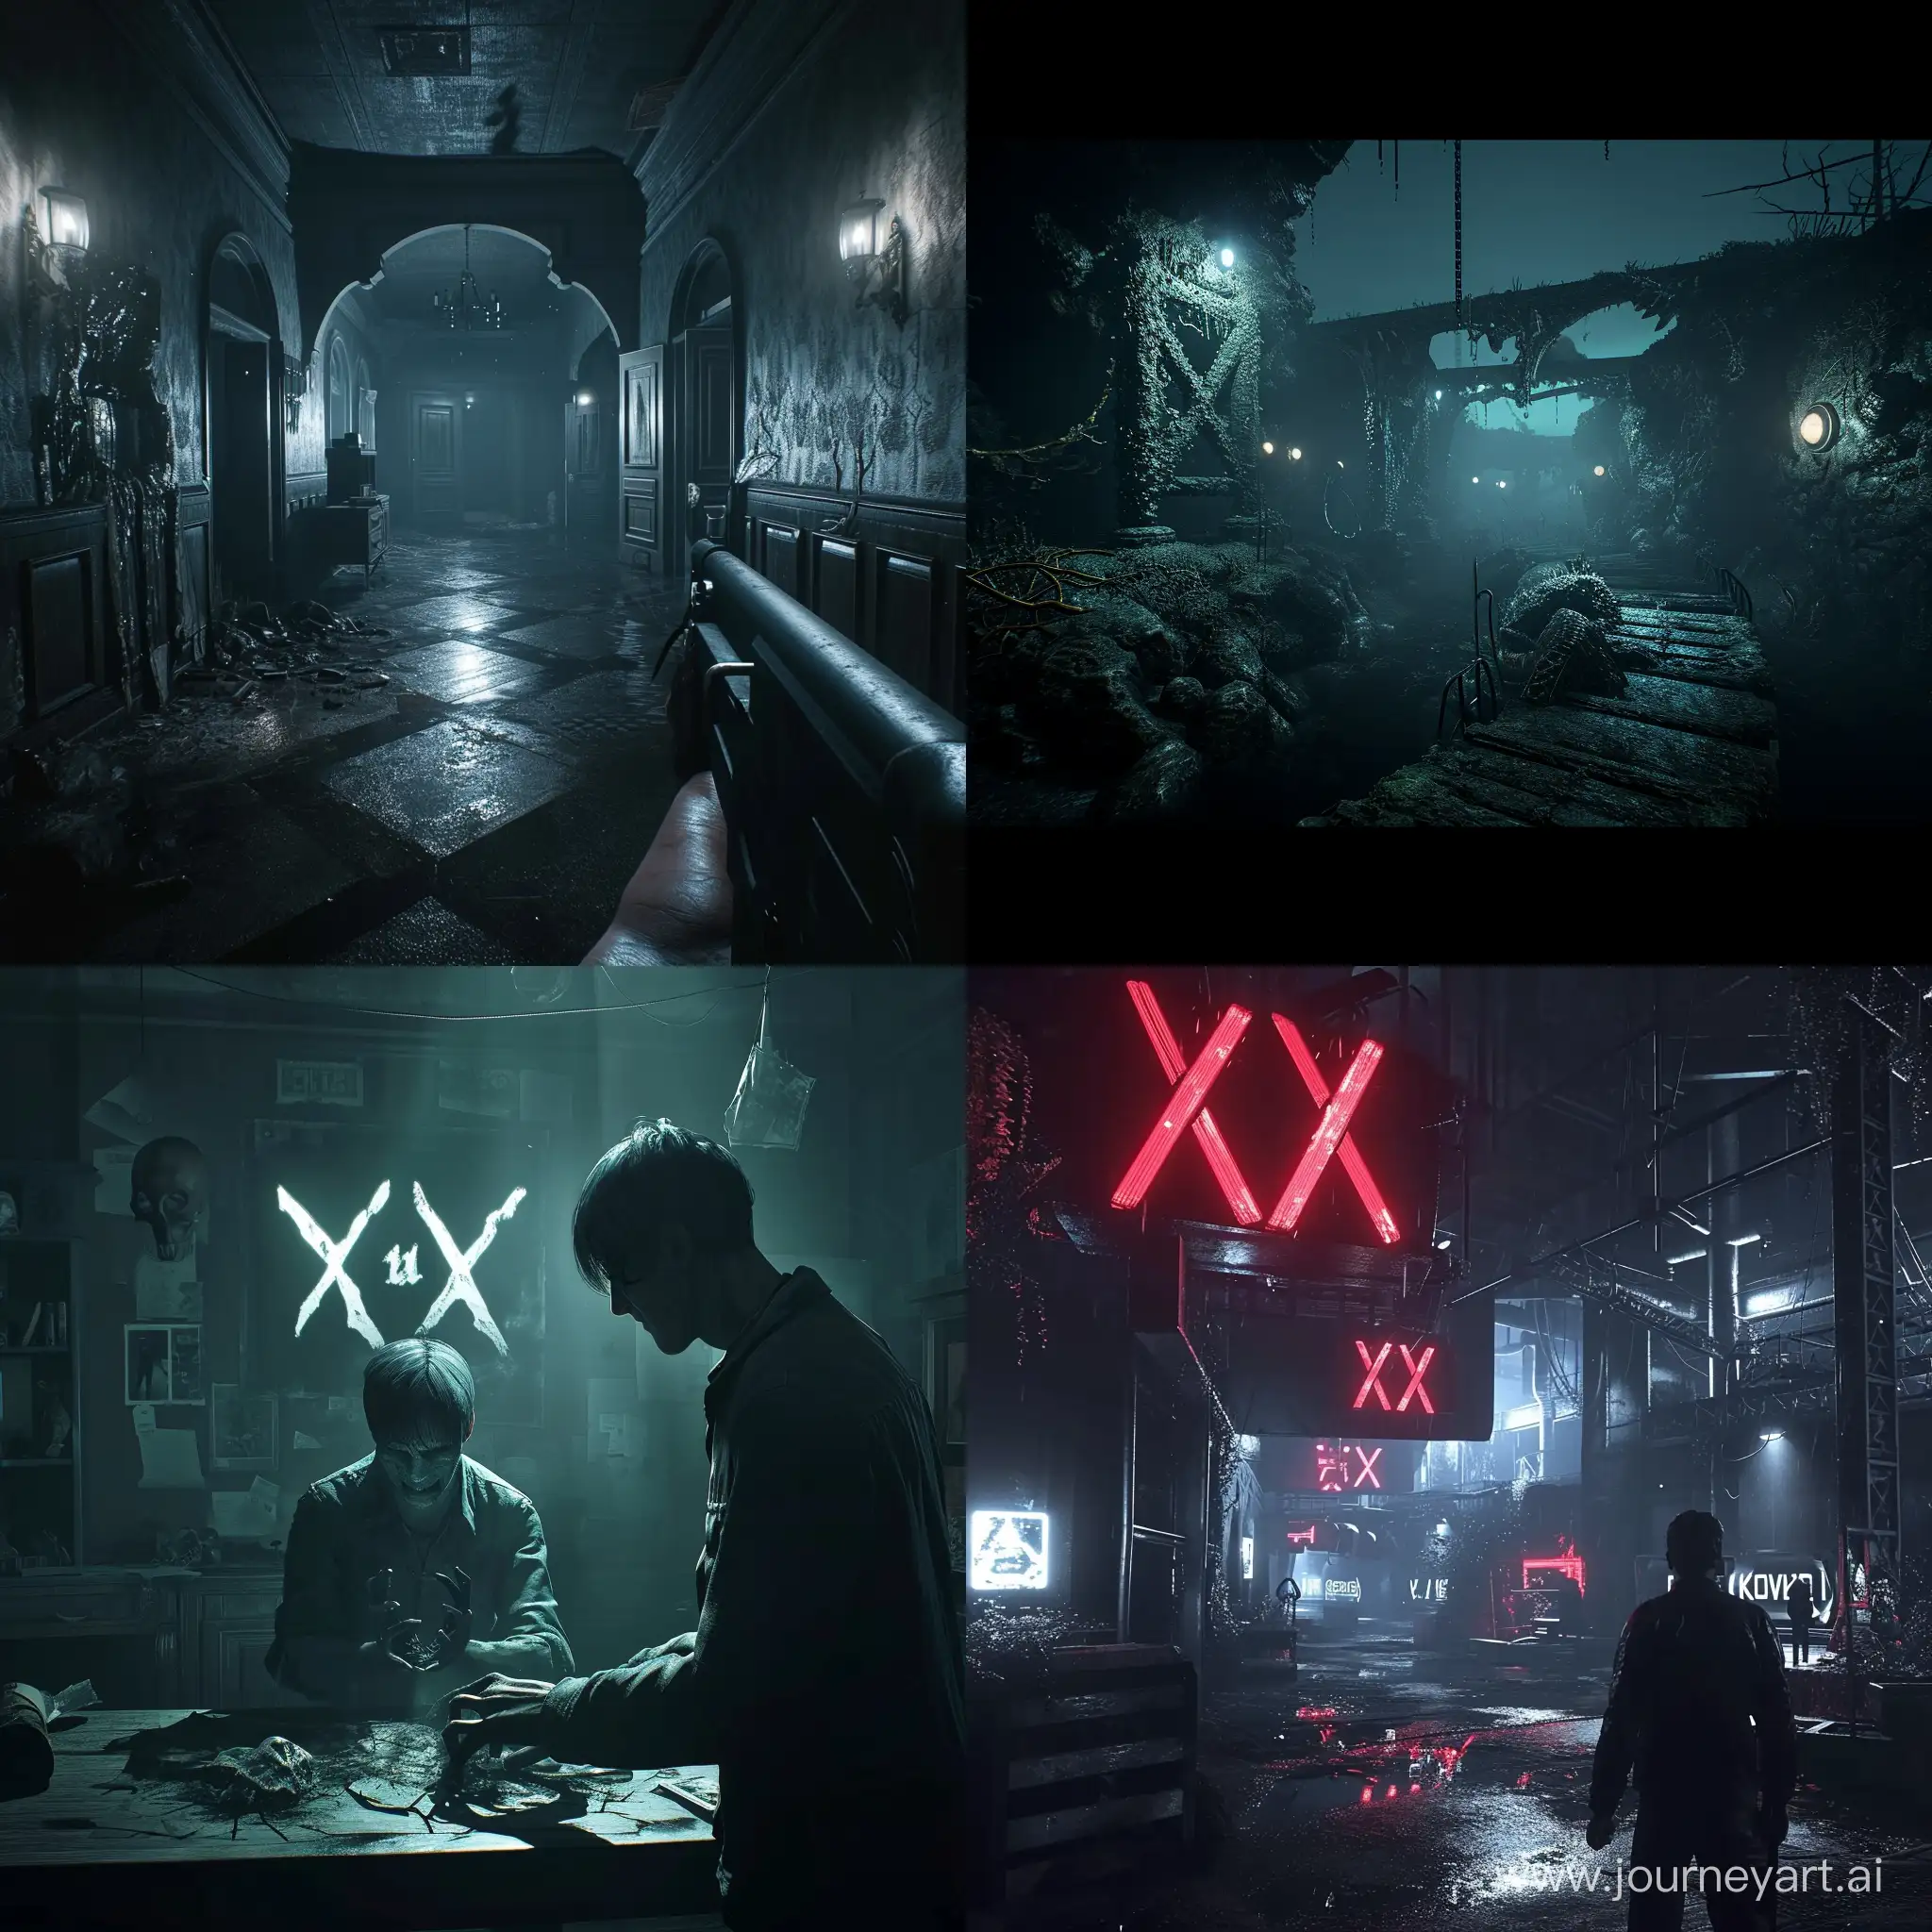 Thrilling-Gameplay-in-The-Dark-Pictures-Anthology-XaX